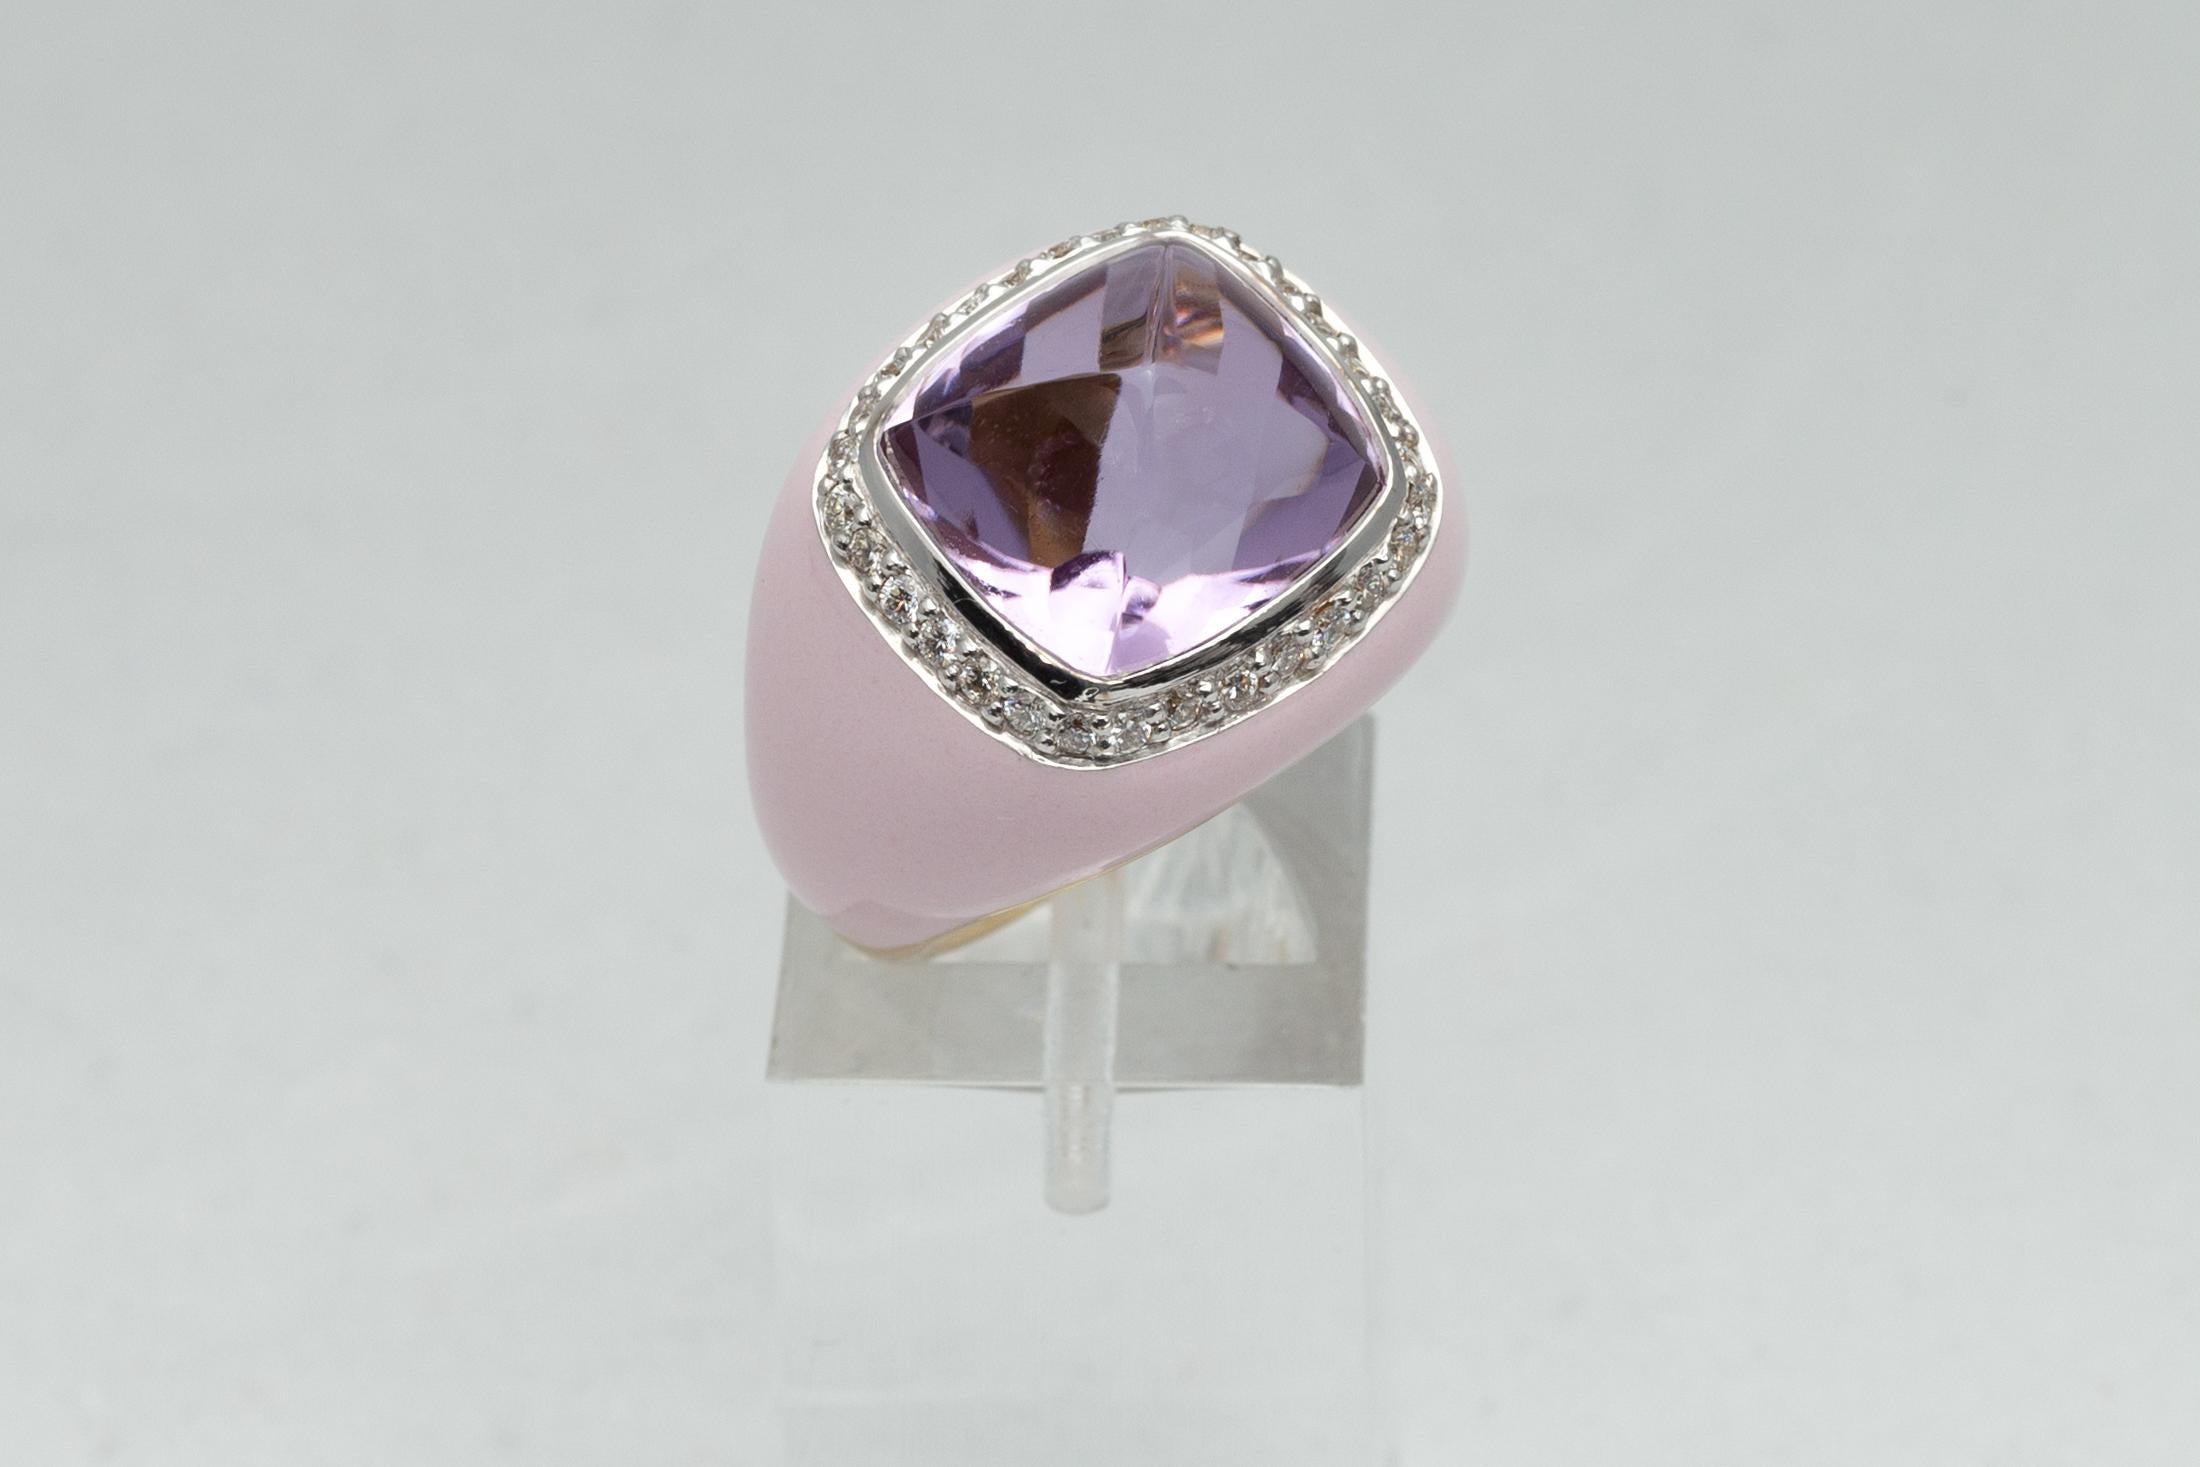 An Italian Modern sugarloaf cabochon light Amethyst pink enameled cocktail ring in 18K yellow gold, circa 2000. Boasting a mesmerizing light sugarloaf cabochon Amethyst of high end quality surrounded by Diamonds of 0.28 carats and set in pink enamel